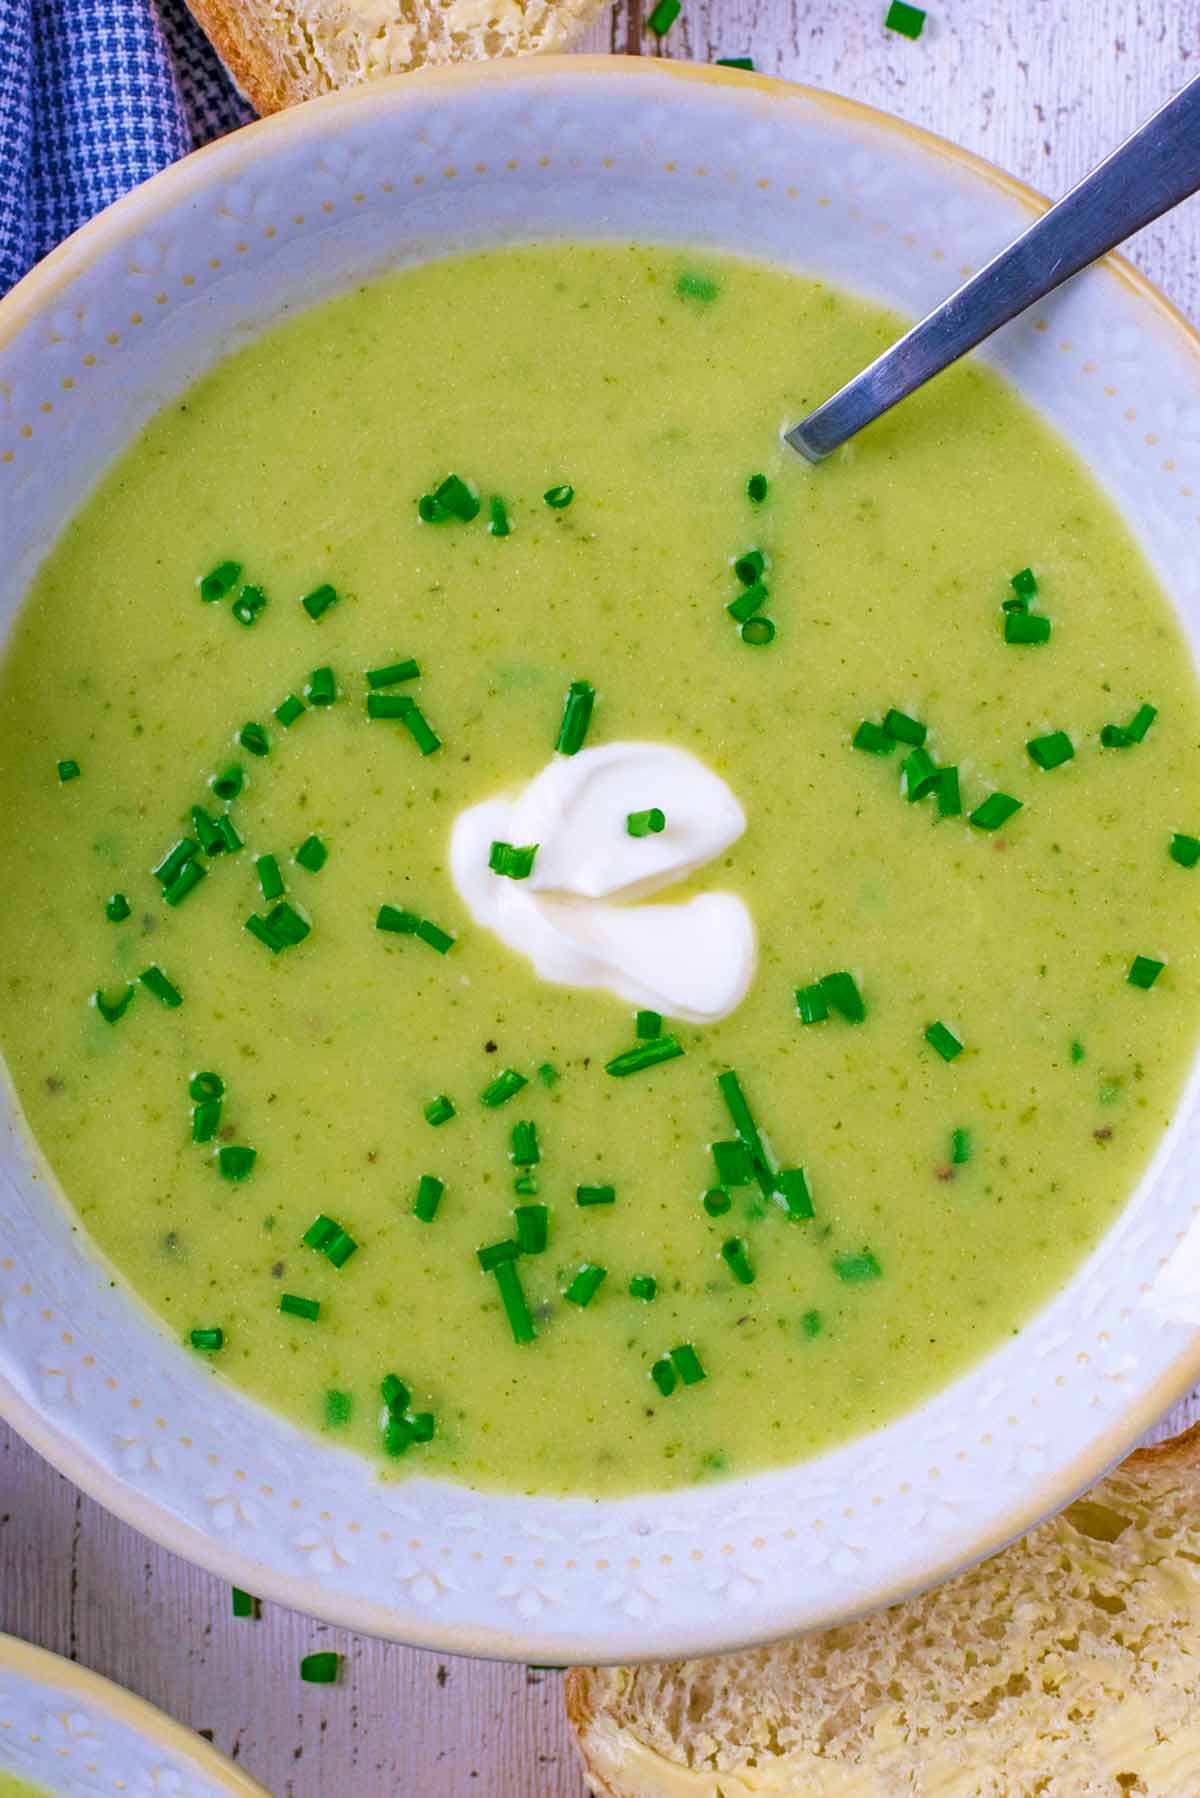 Courgette soup with a dollop of cream and a spoon.